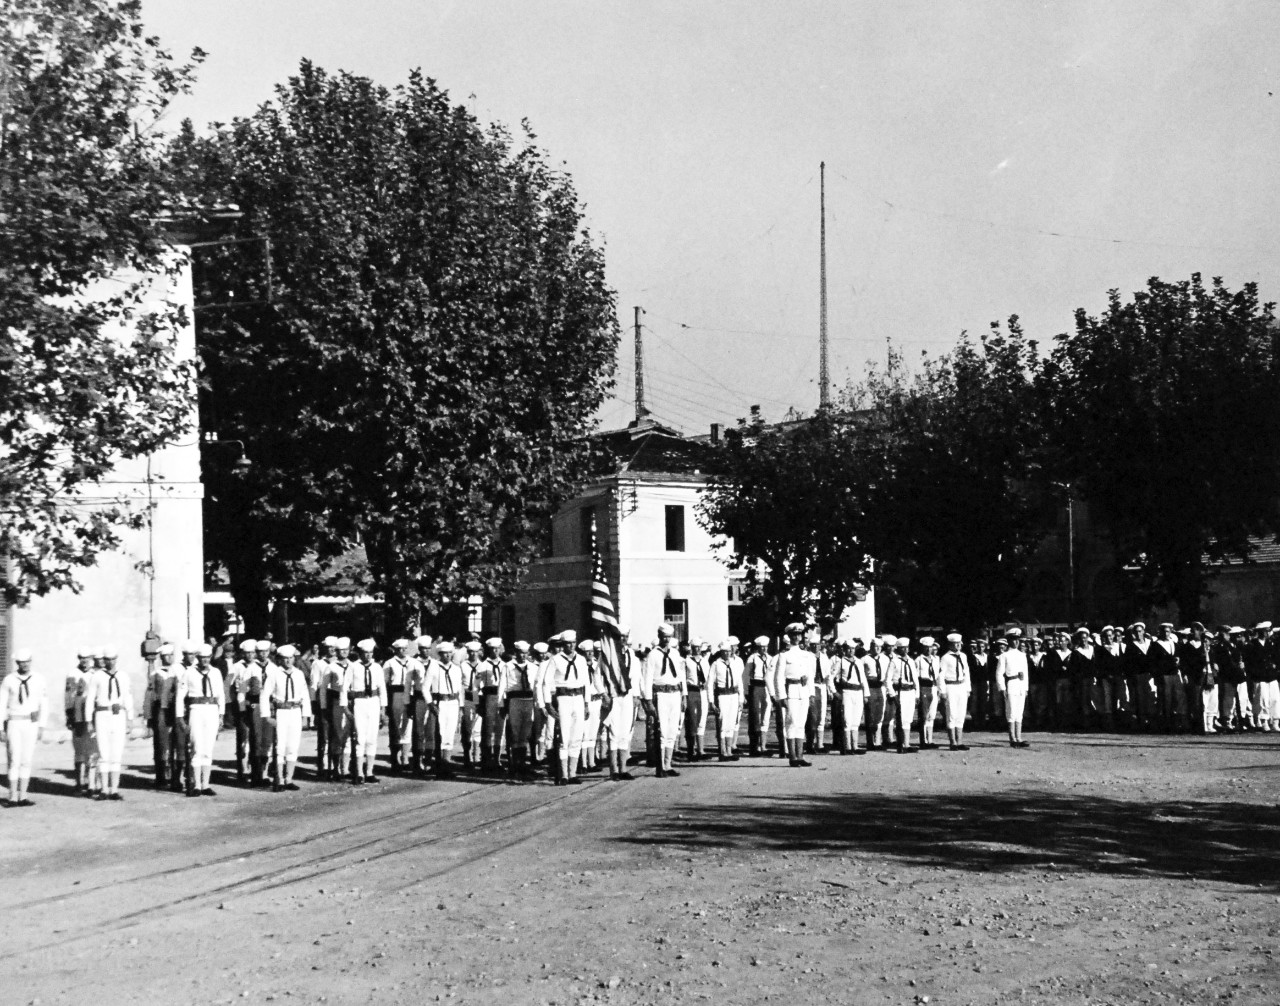 80-G-248726:   Invasion of Southern France, Toulon,  September 1944.   Ceremonies in Toulon celebrating the liberation of France.  Taken by USS Philadelphia (CL-41), 14 September 1944.   Philadelphia crew is shown during ceremony.  Official U.S. Navy Photograph, now in the collection of the National Archives.  (2014/4/10). 